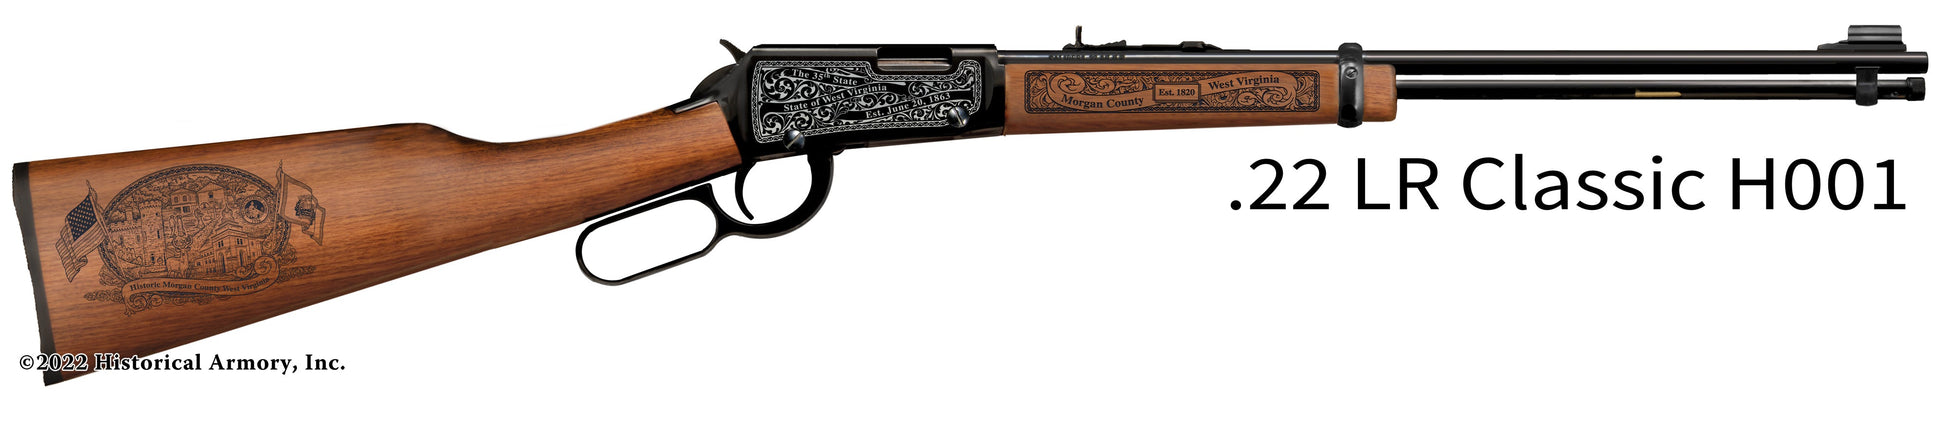 Morgan County West Virginia Engraved Henry H001 Rifle